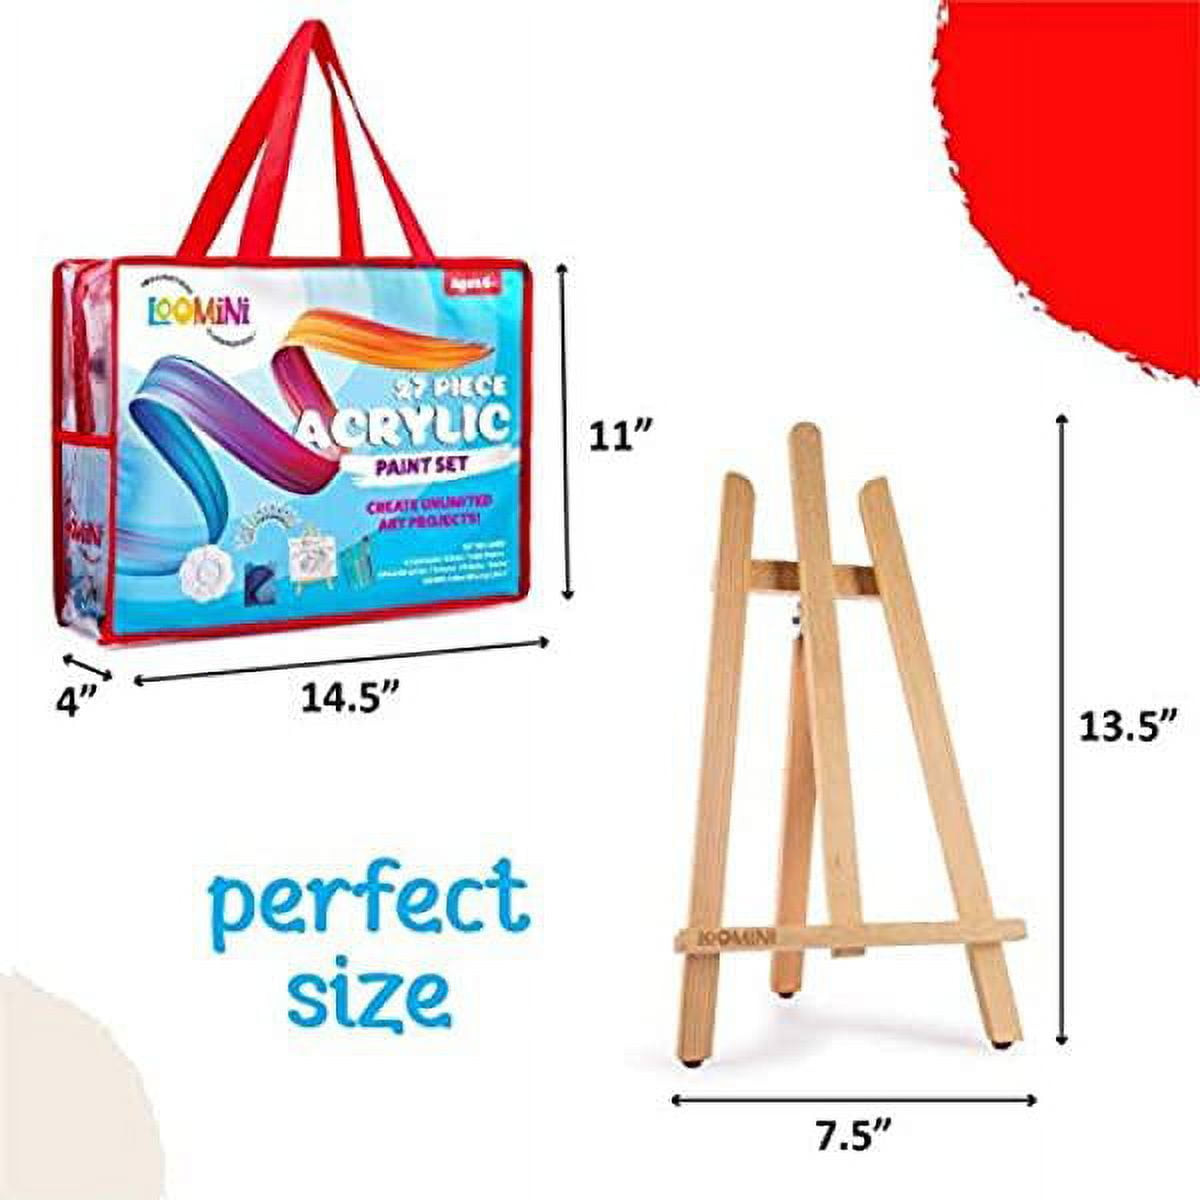 RISEBRITE Acrylic Paint Set with Canvas *€* 25Pcs Painting Kit Includes  Mini Easel, Premium Painting Supplies, Brushes, Art Canvases and More 